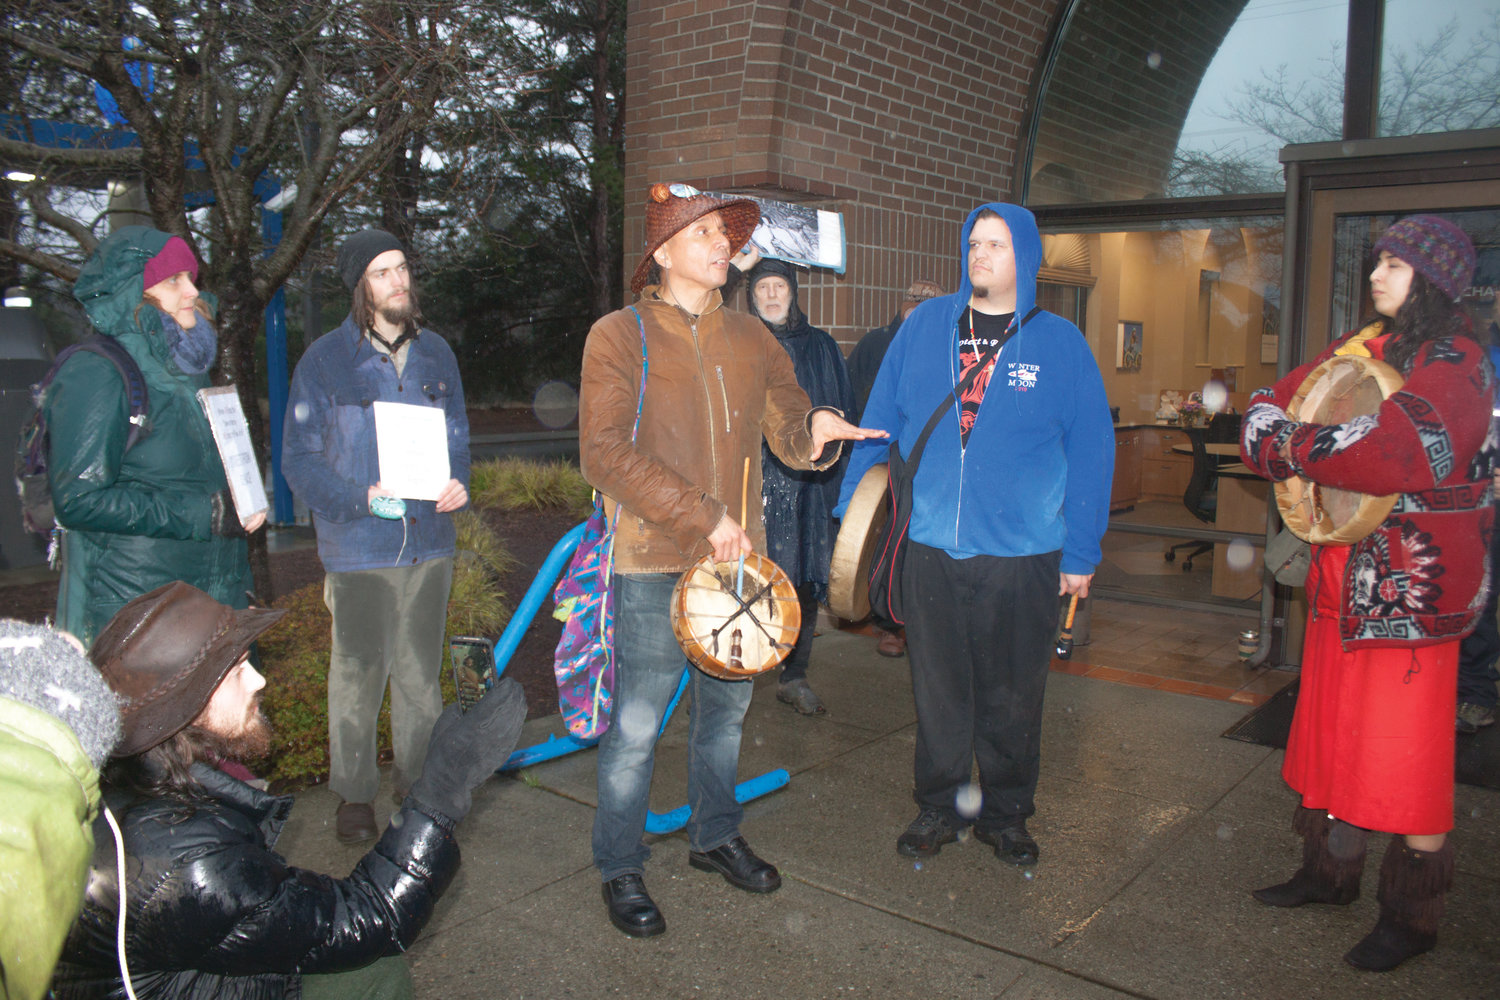 Paul Chiyokten Wagner of the Redmond-based Saanich First Nations and founder of the Protectors of the Salish Sea leads a group of natives and allies in speeches and protest songs outside the Chase Bank branch on Kearney Street Feb. 5.